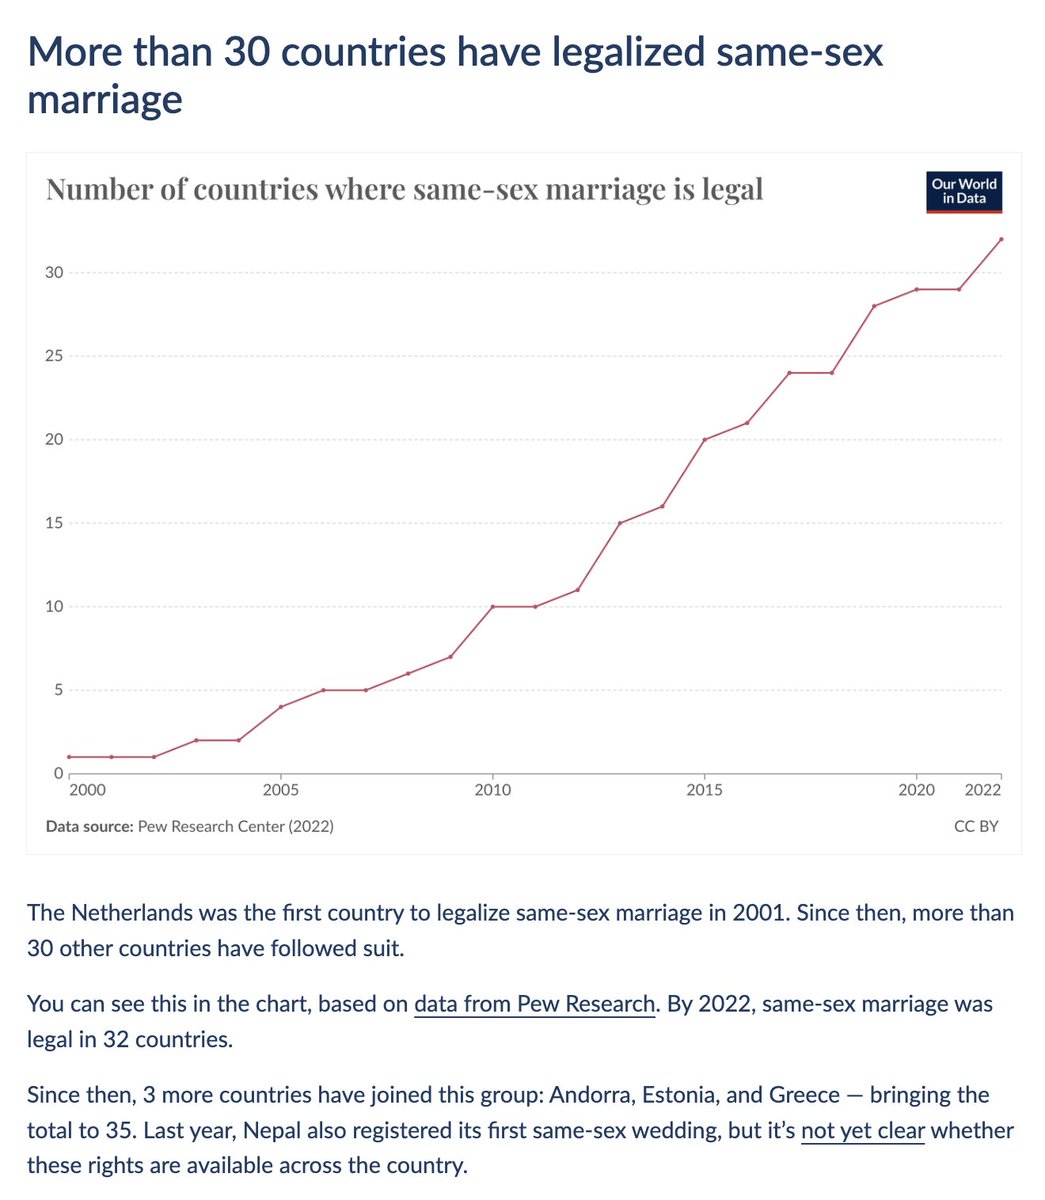 More than 30 countries have legalized same-sex marriage Today's data insight is by @_HannahRitchie. You can find all of our Data Insights on their dedicated feed: ourworldindata.org/data-insights